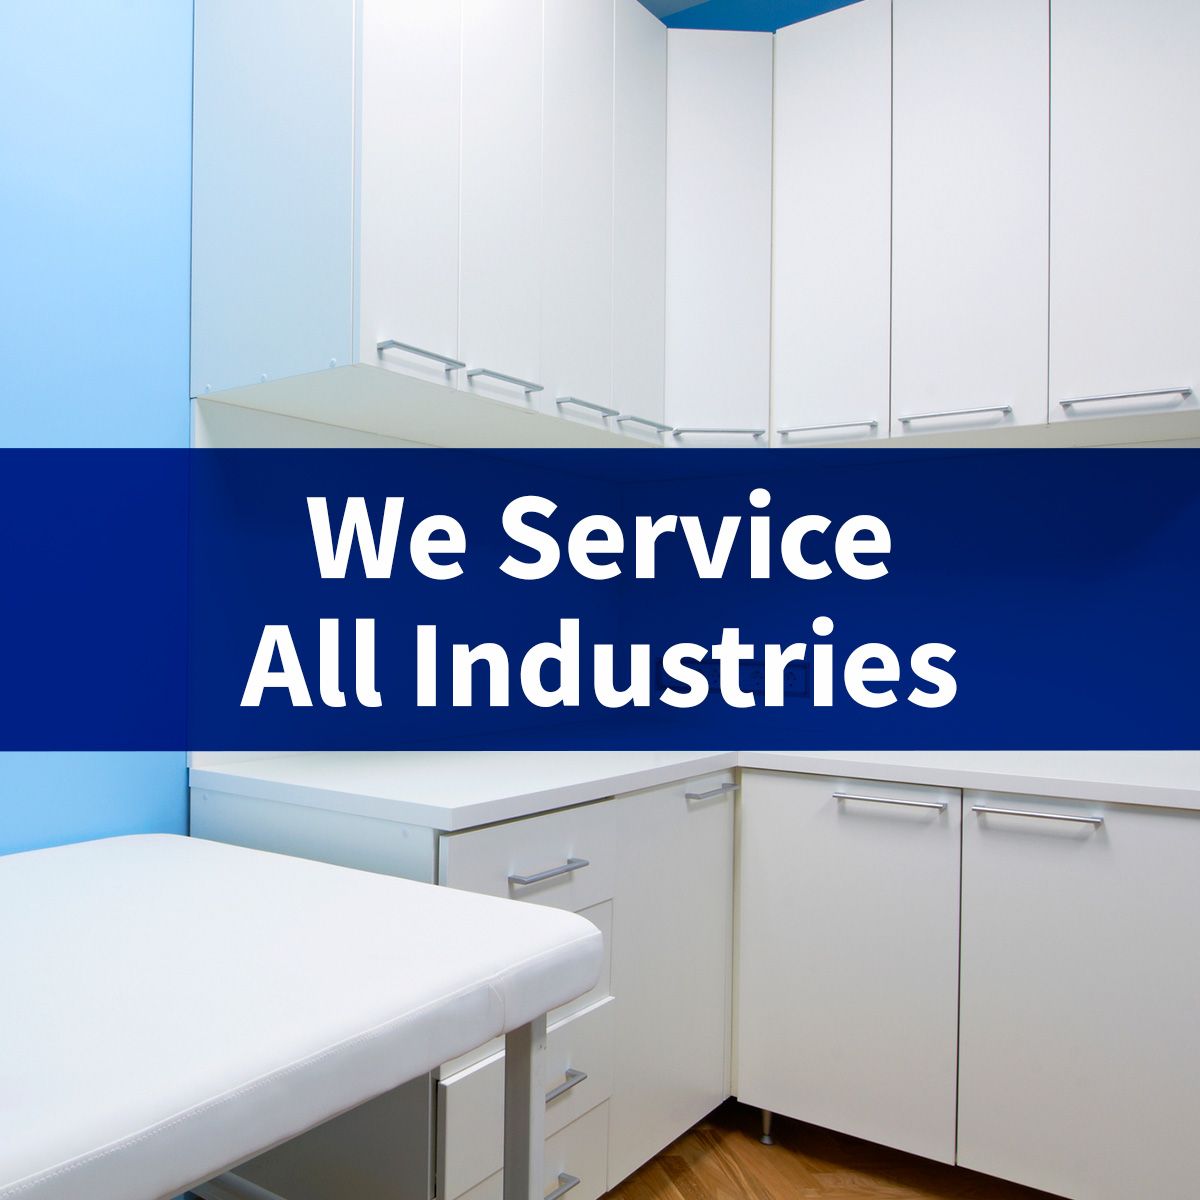 We Service All Industries